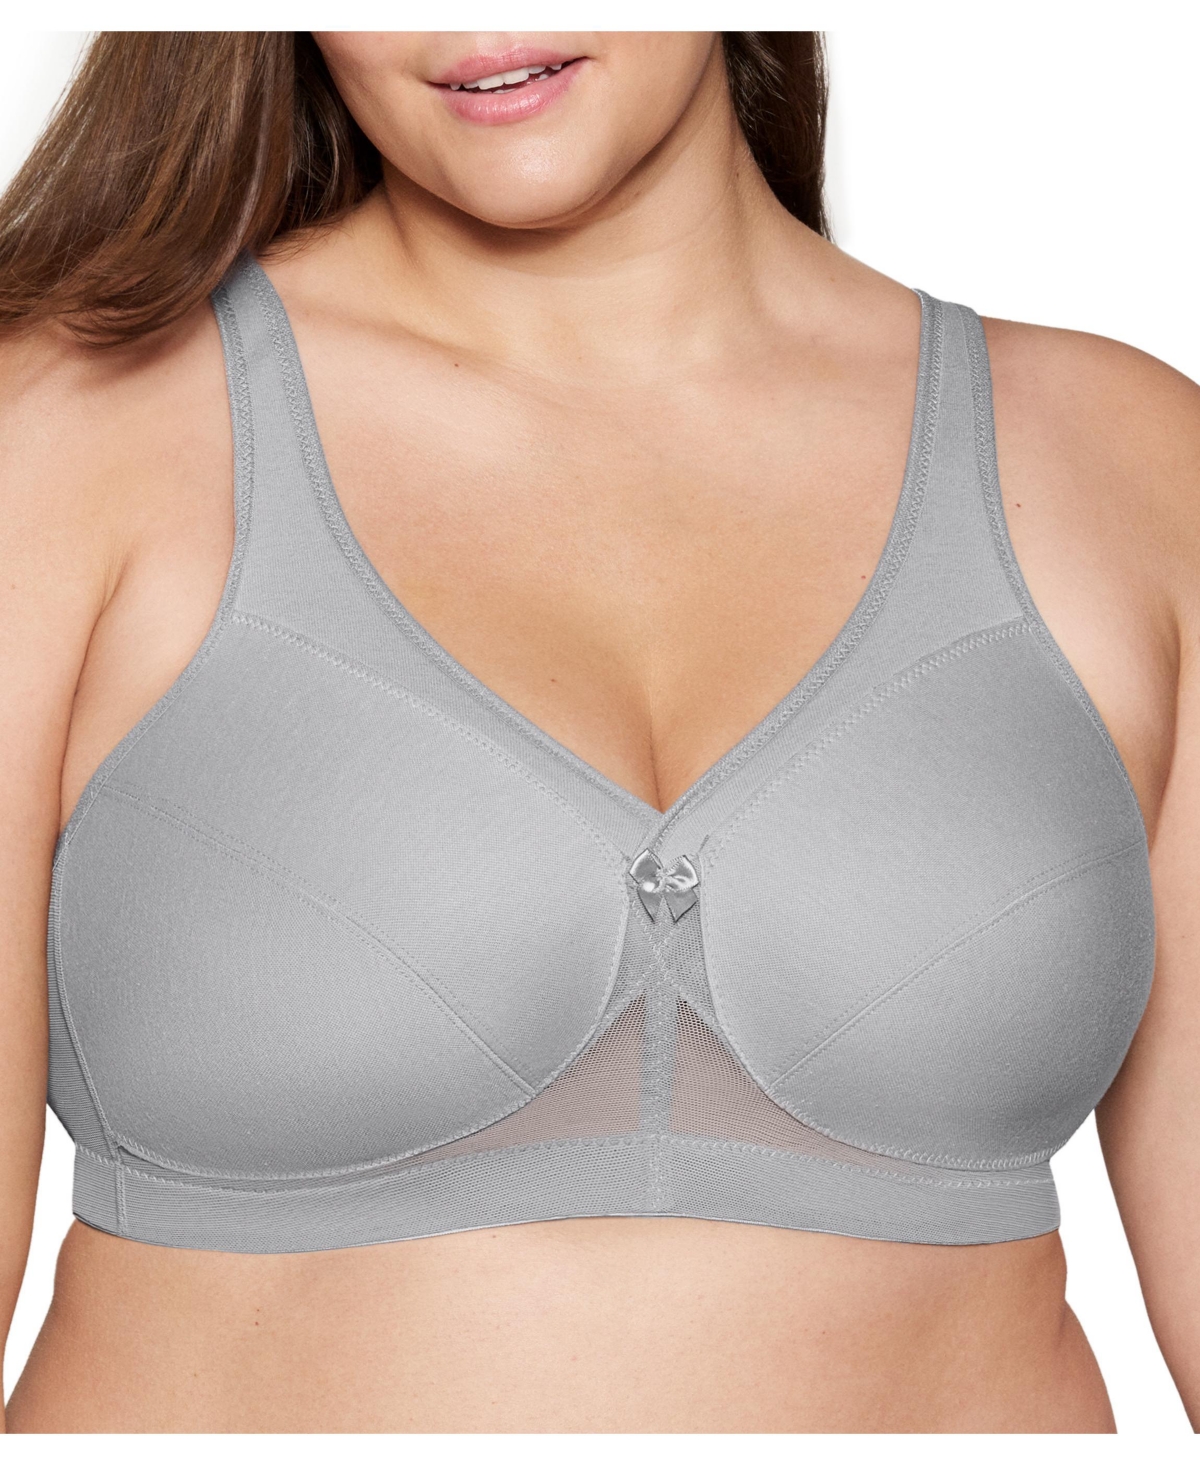 Women's Full Figure Plus Size MagicLift Active Support Bra Wirefree #1005 - Gray